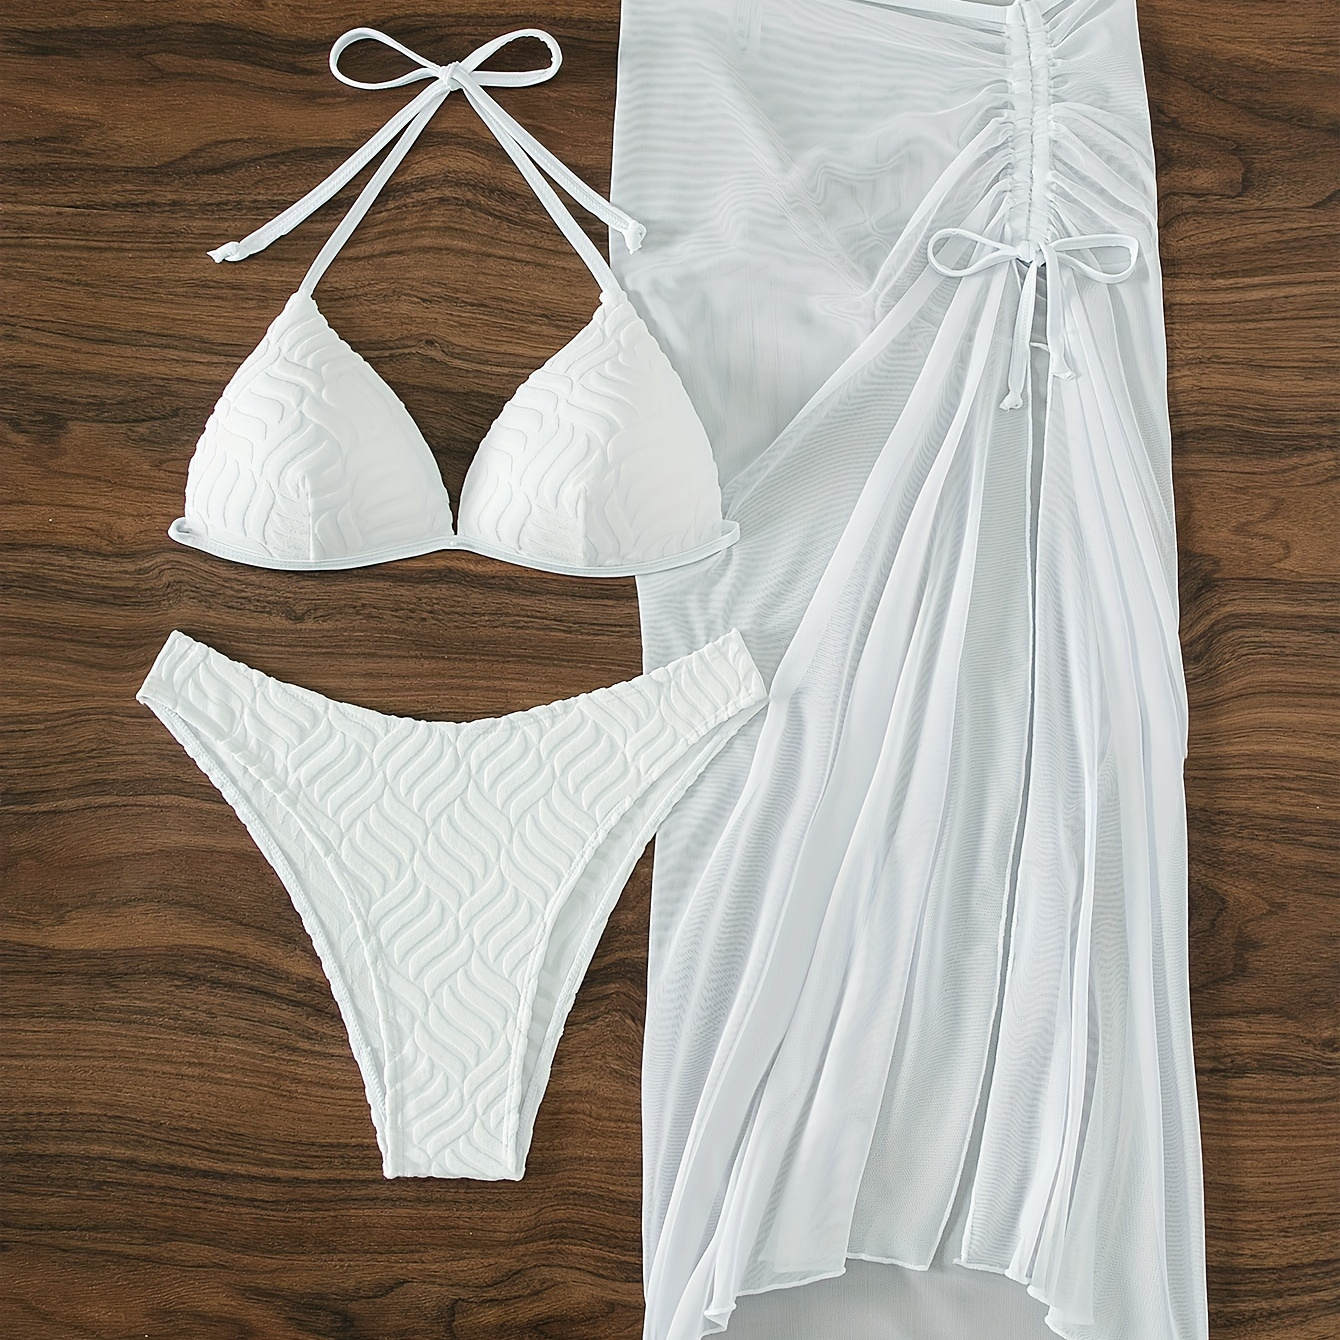 

Embossed Textured Fabric Bikini With Drawstring Split Mesh Cover Up Skirt, Plain White High Stretch Halter 3 Piece Set Swimsuits, Women's Swimwear & Clothing Triangle Top